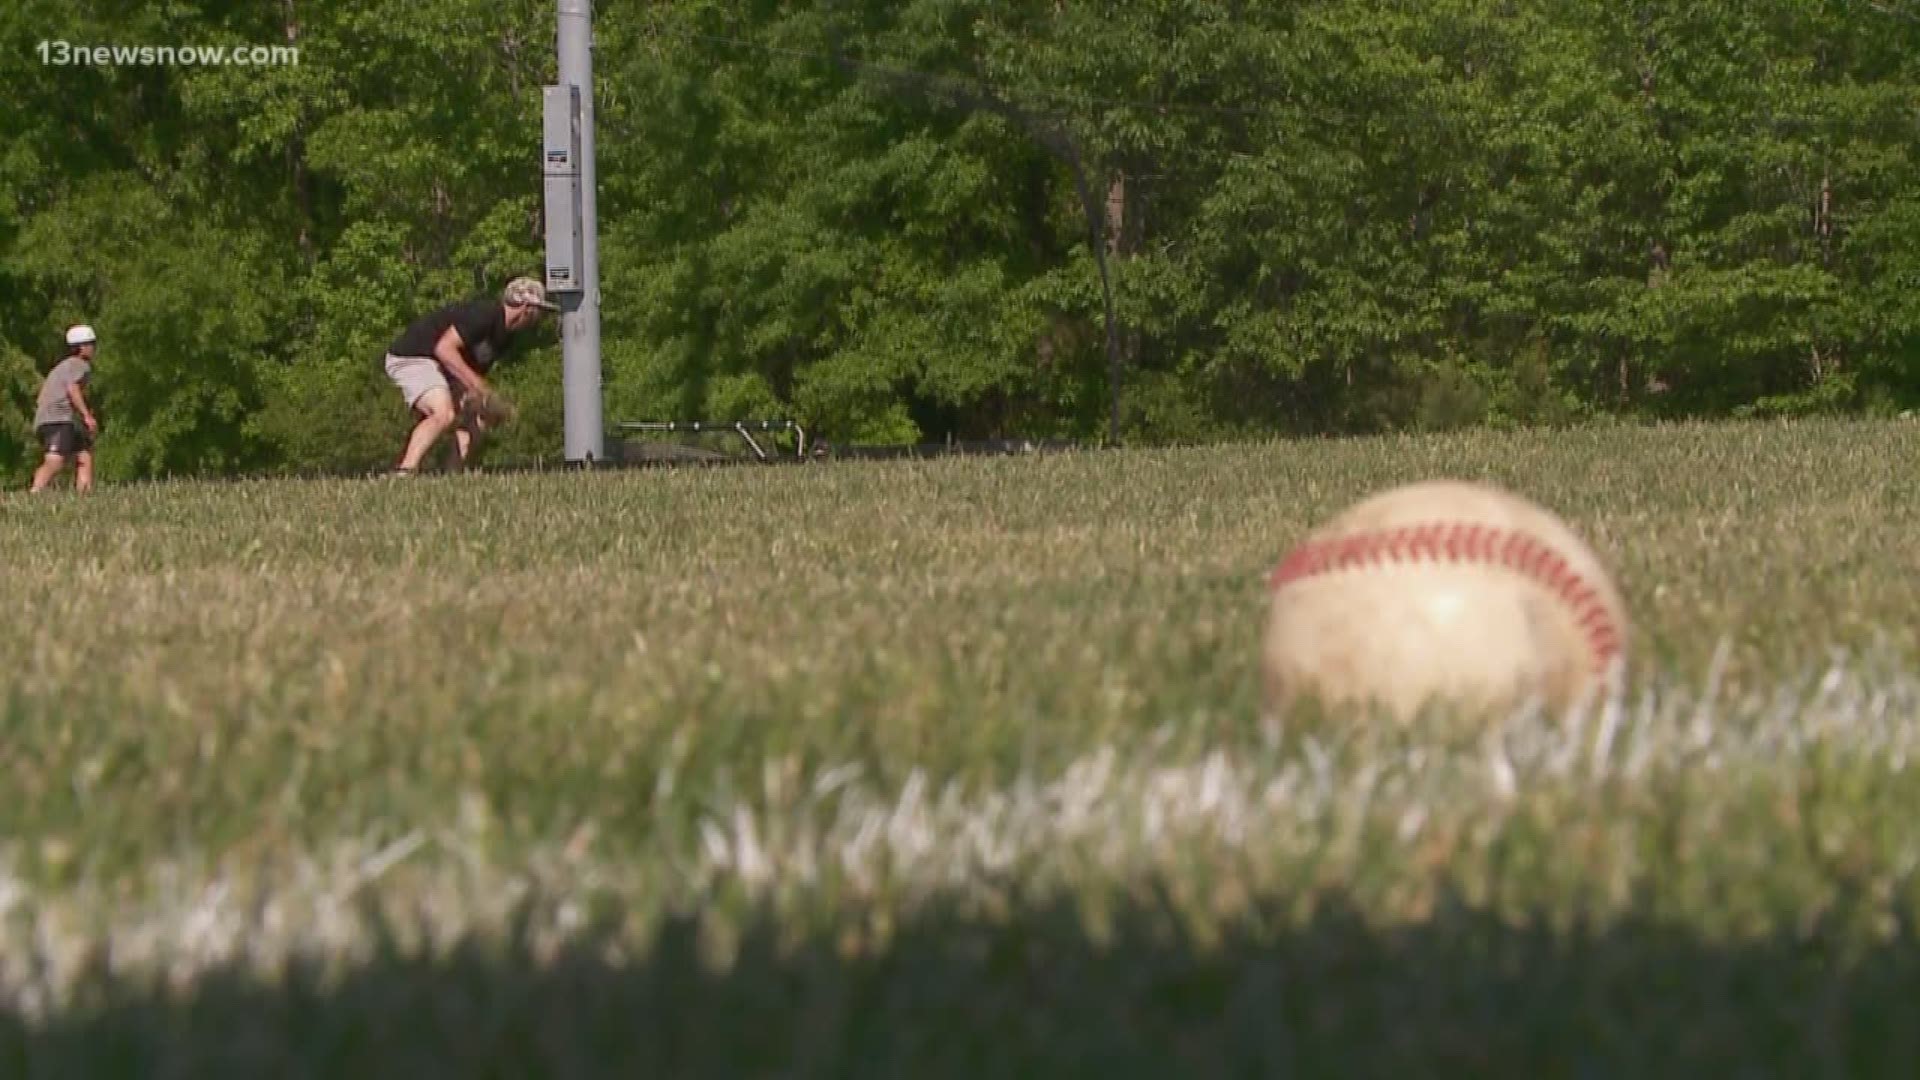 Dunaway has starred at shortstop for Hickory baseball for the last four years.